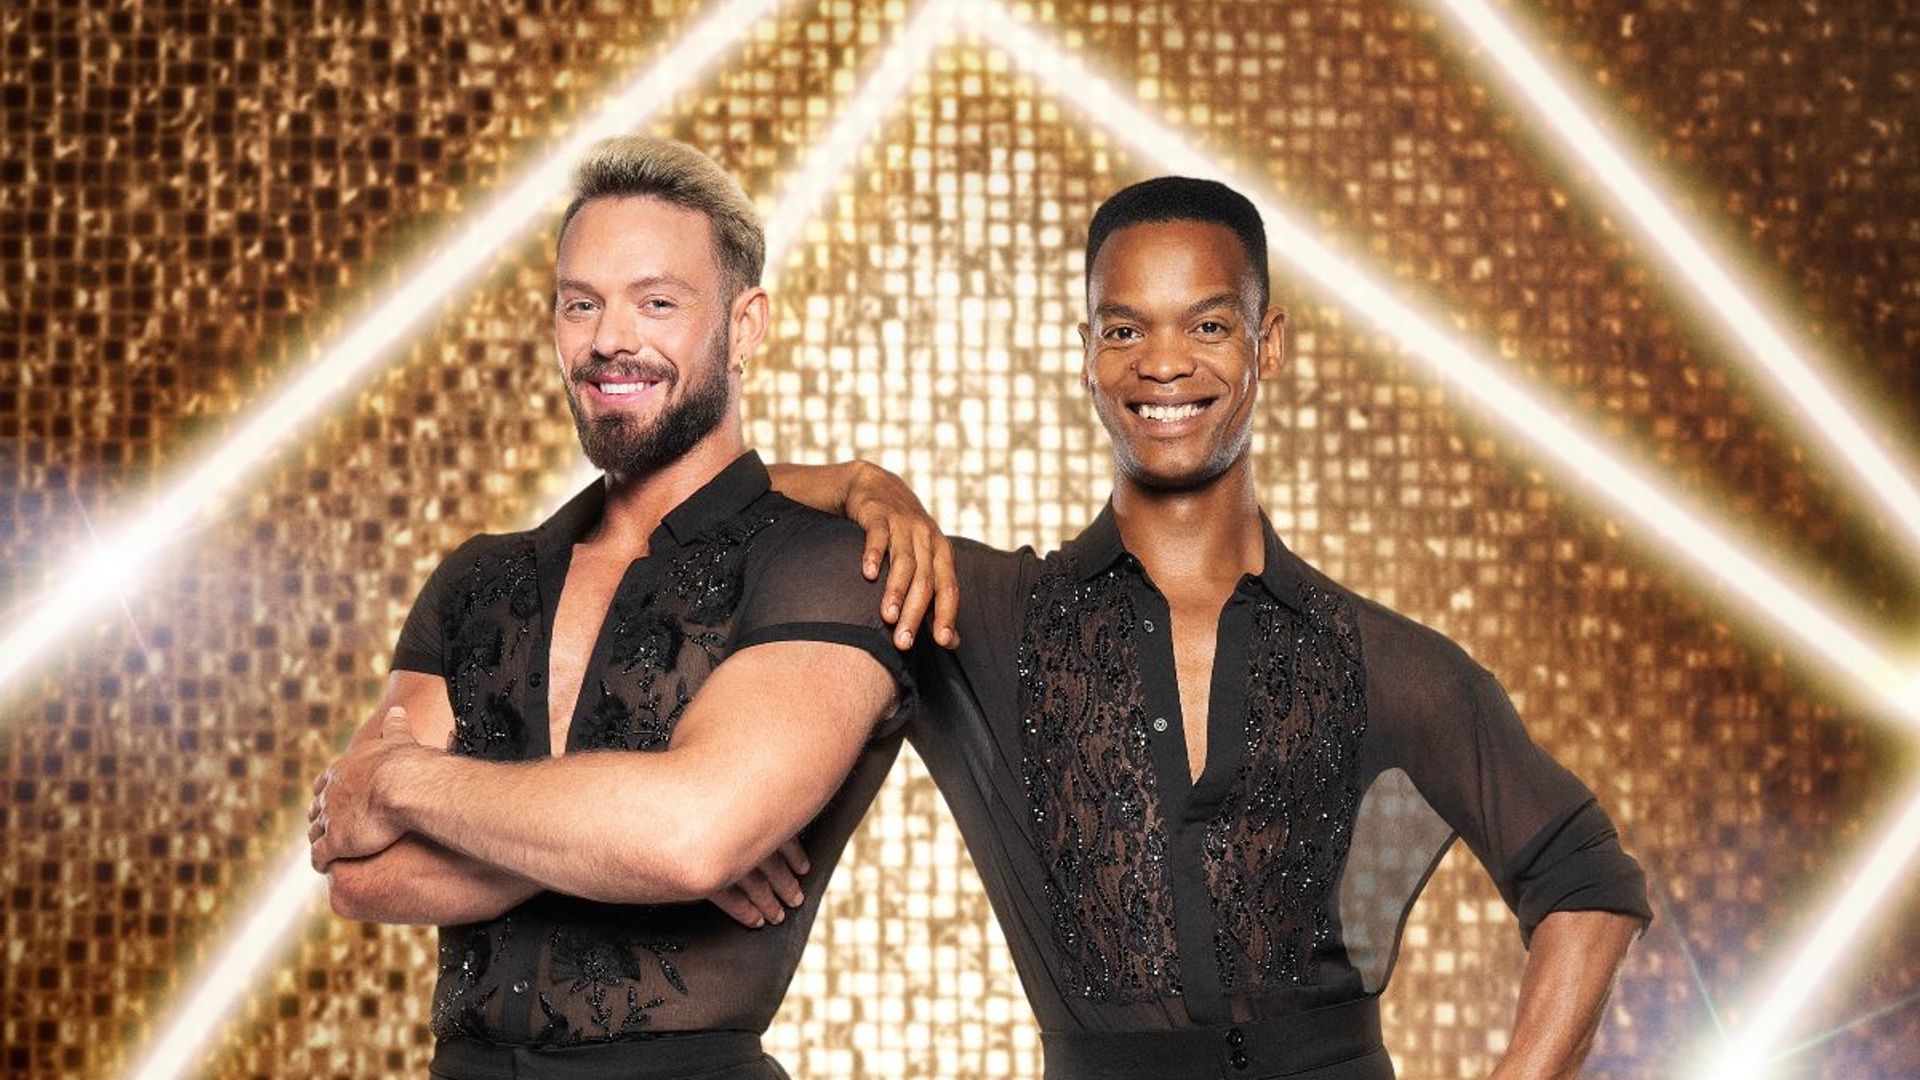 Exclusive: John Whaite reveals big future plans with Johannes after Strictly